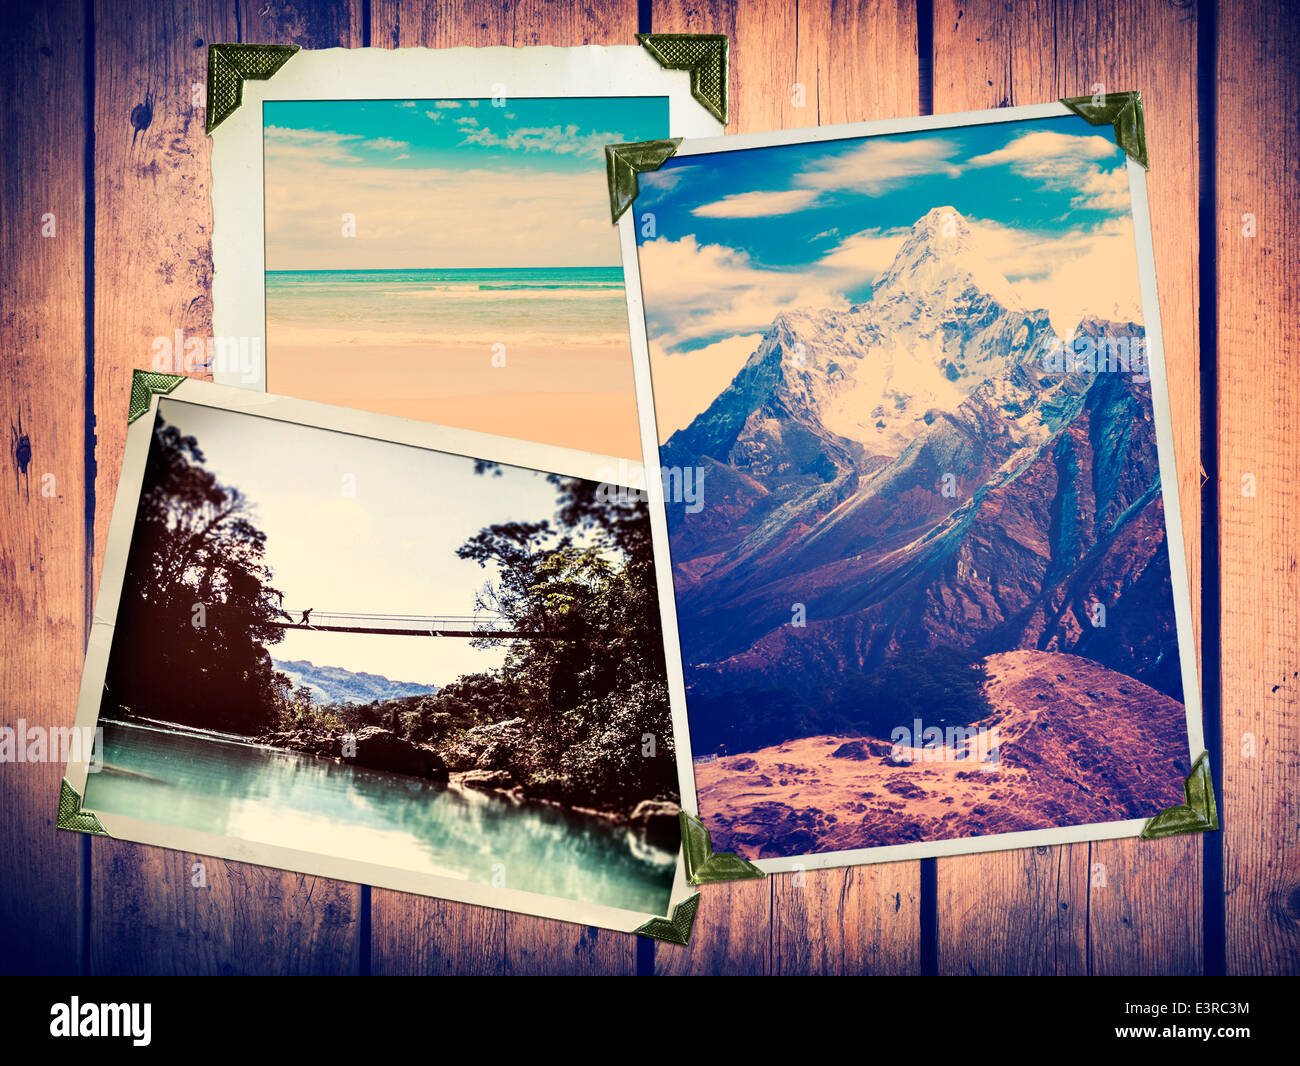 Vintage style adventure travel photos in old photo corners and edges on a wooden background Stock Photo